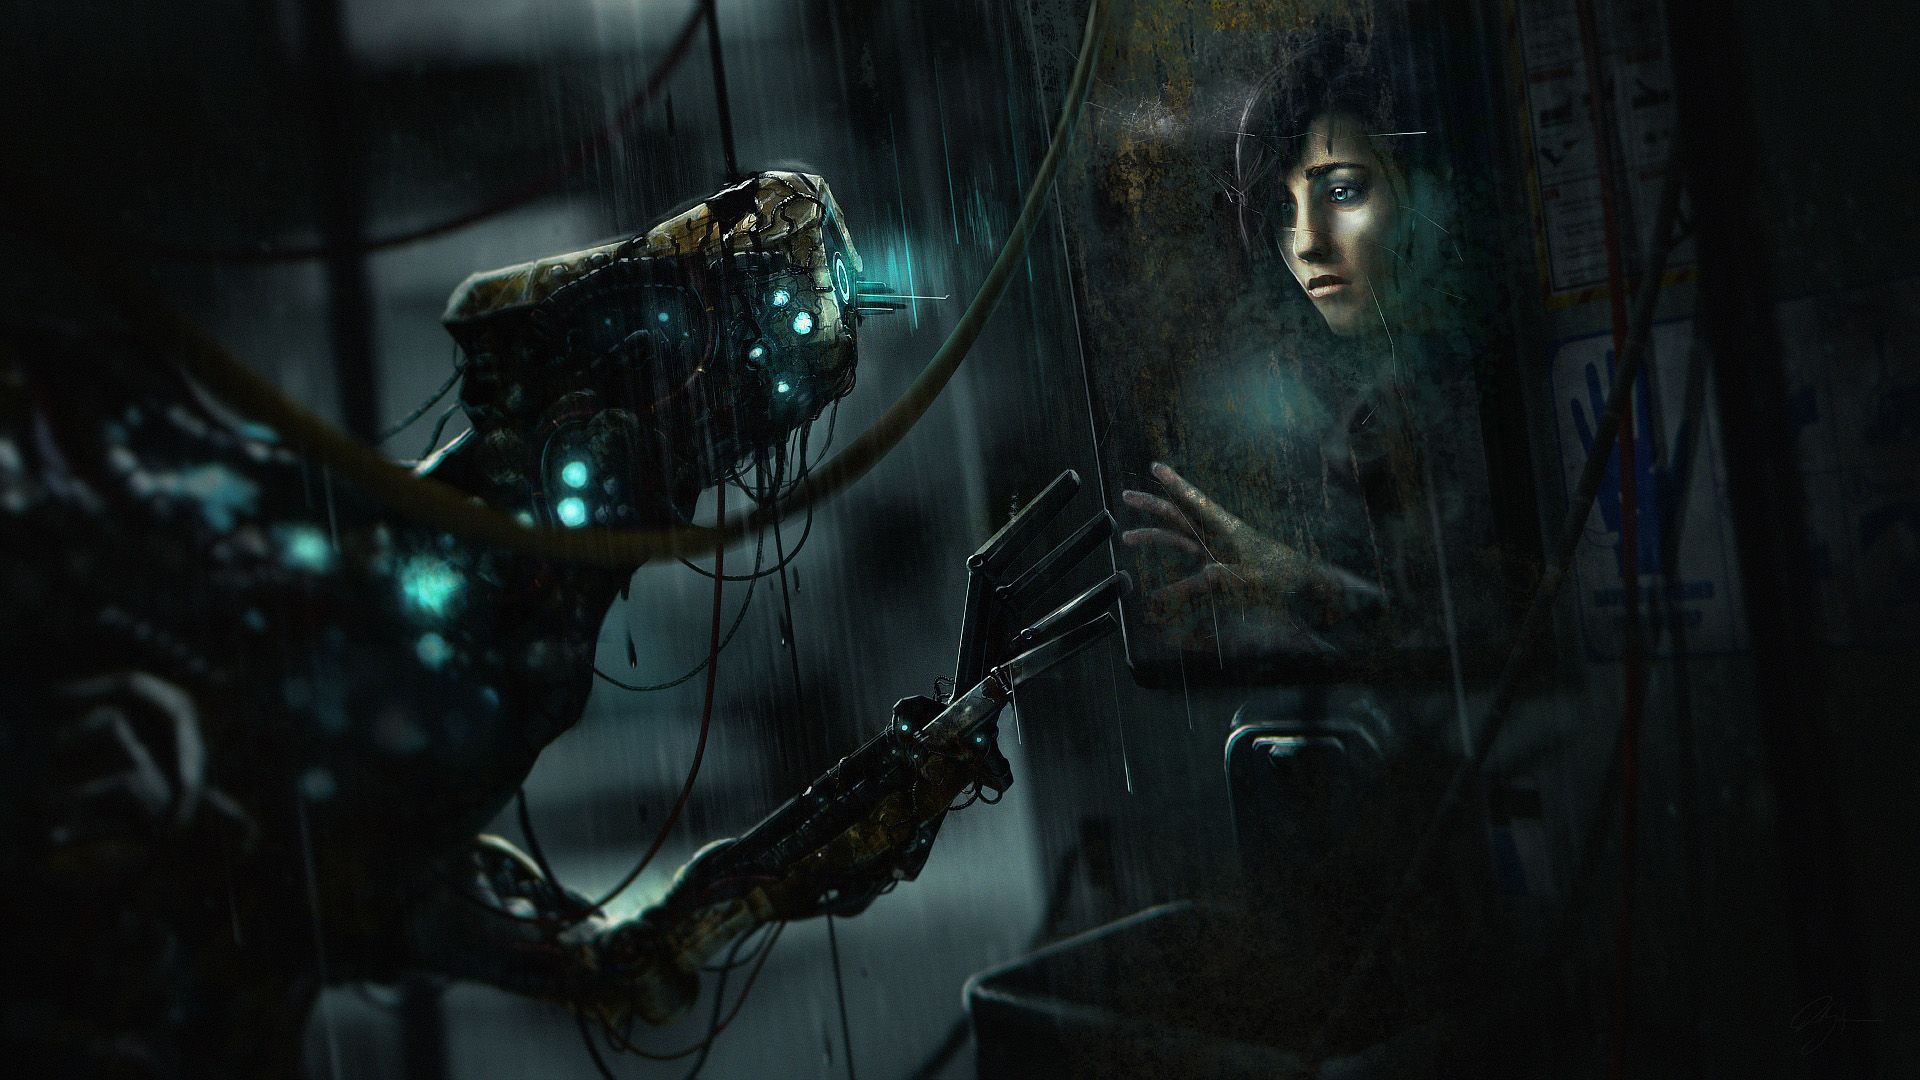 General 1920x1080 Frictional Games robot horror video games SOMA artwork cyberpunk mirror video game art Video Game Horror PC gaming